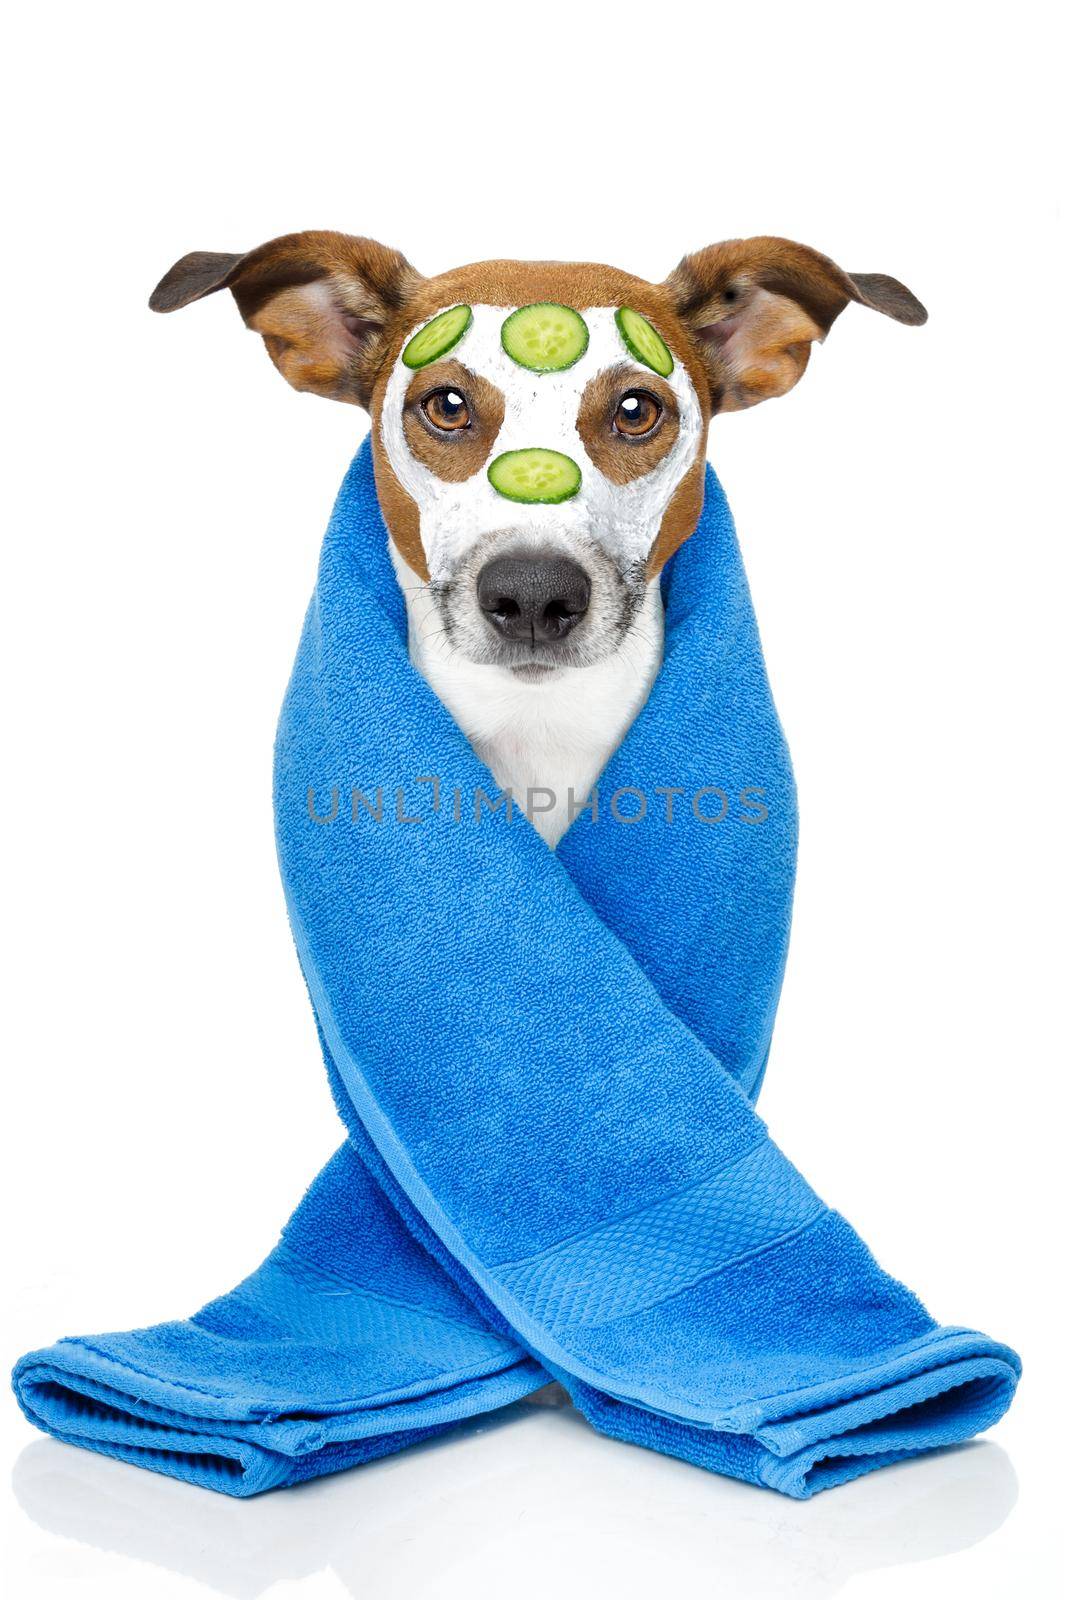 dog with a beauty mask by Brosch